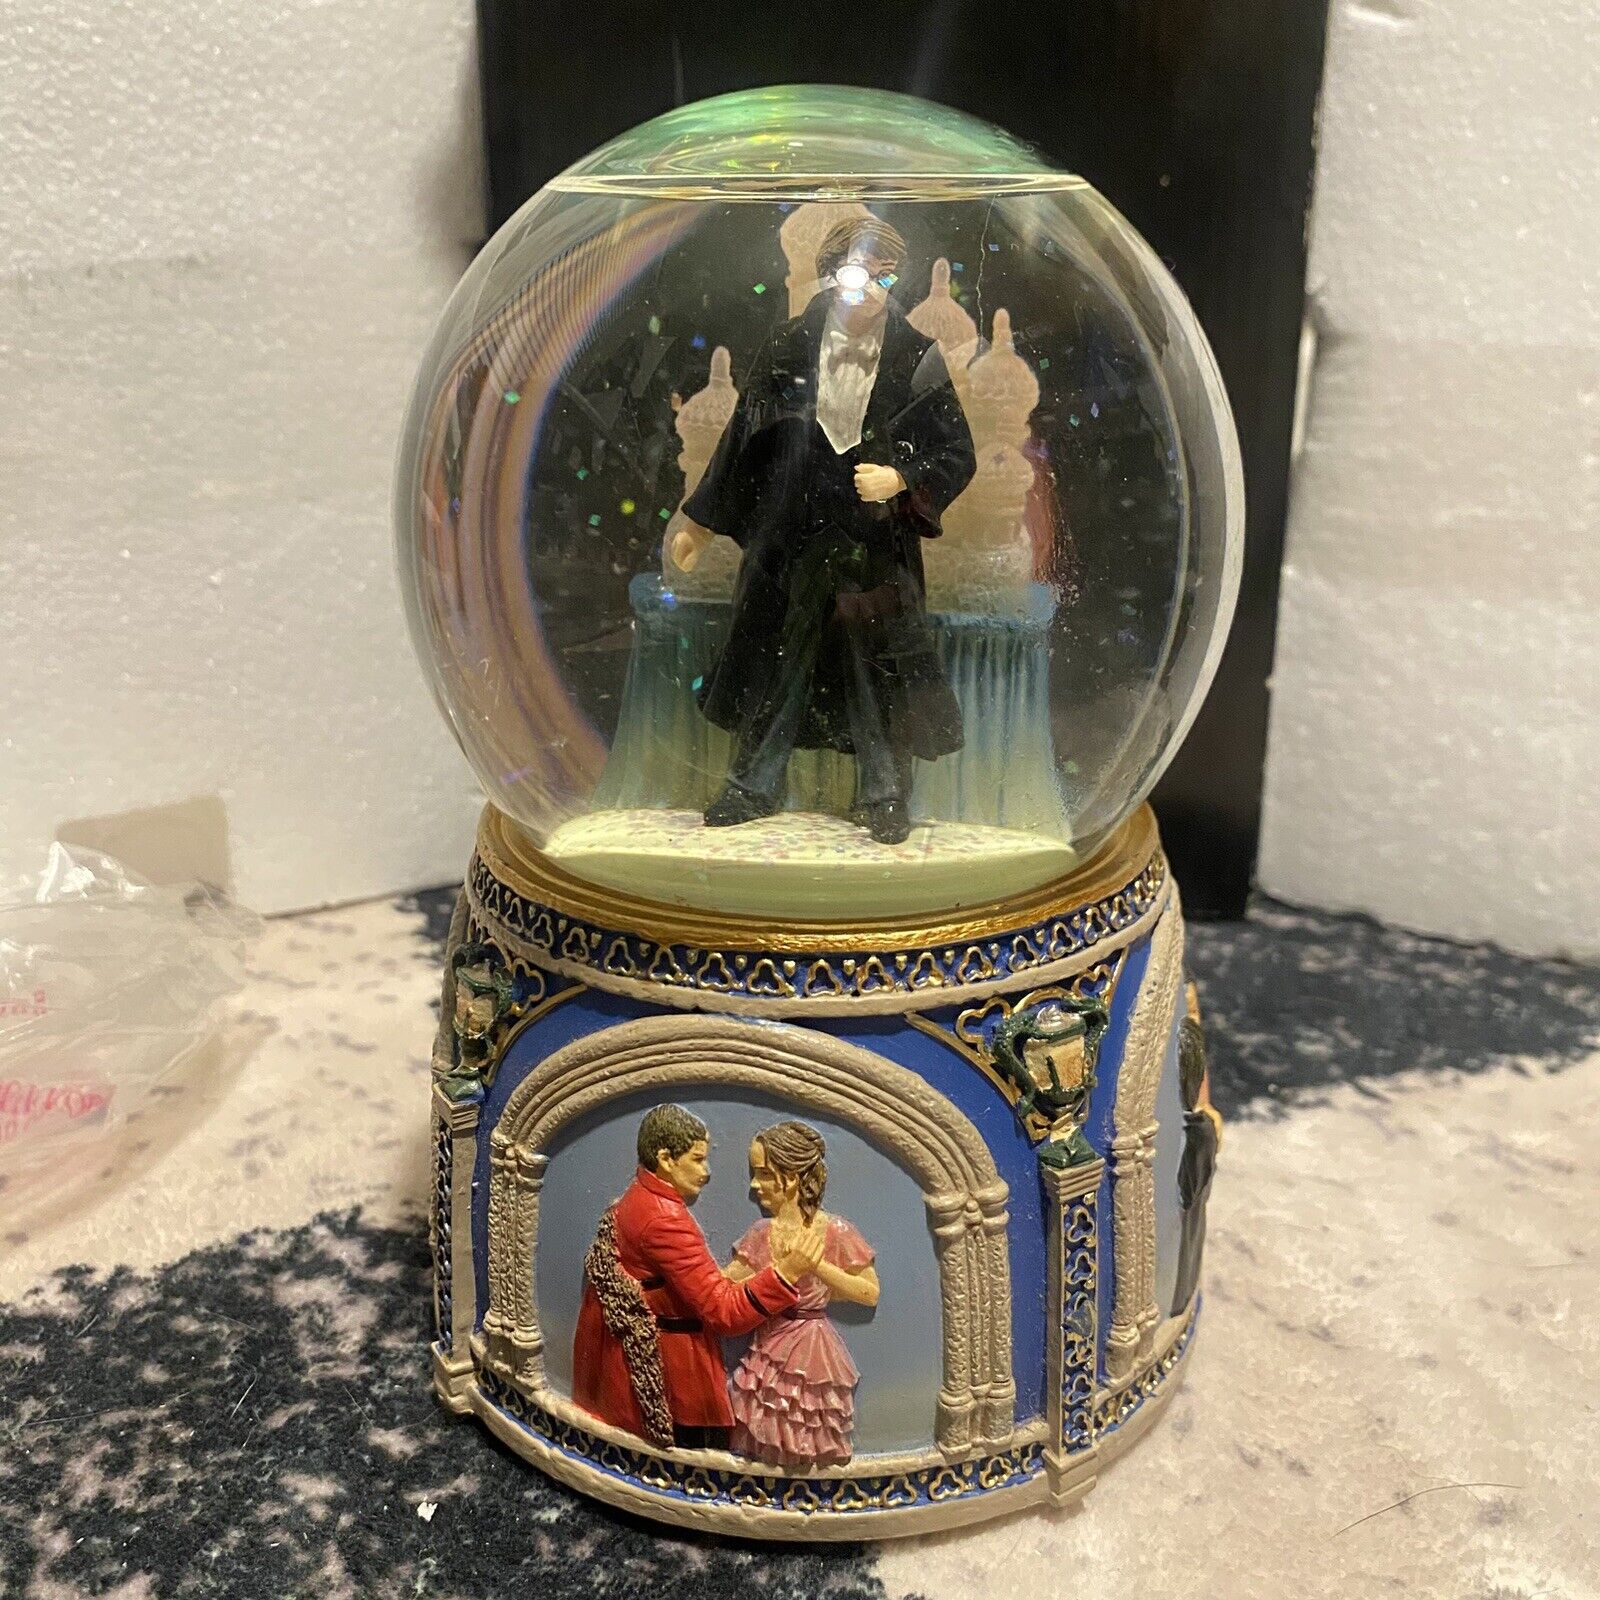 Harry Potter Yule Ball Waterglobe San Francisco Music Box Entry In To The Great